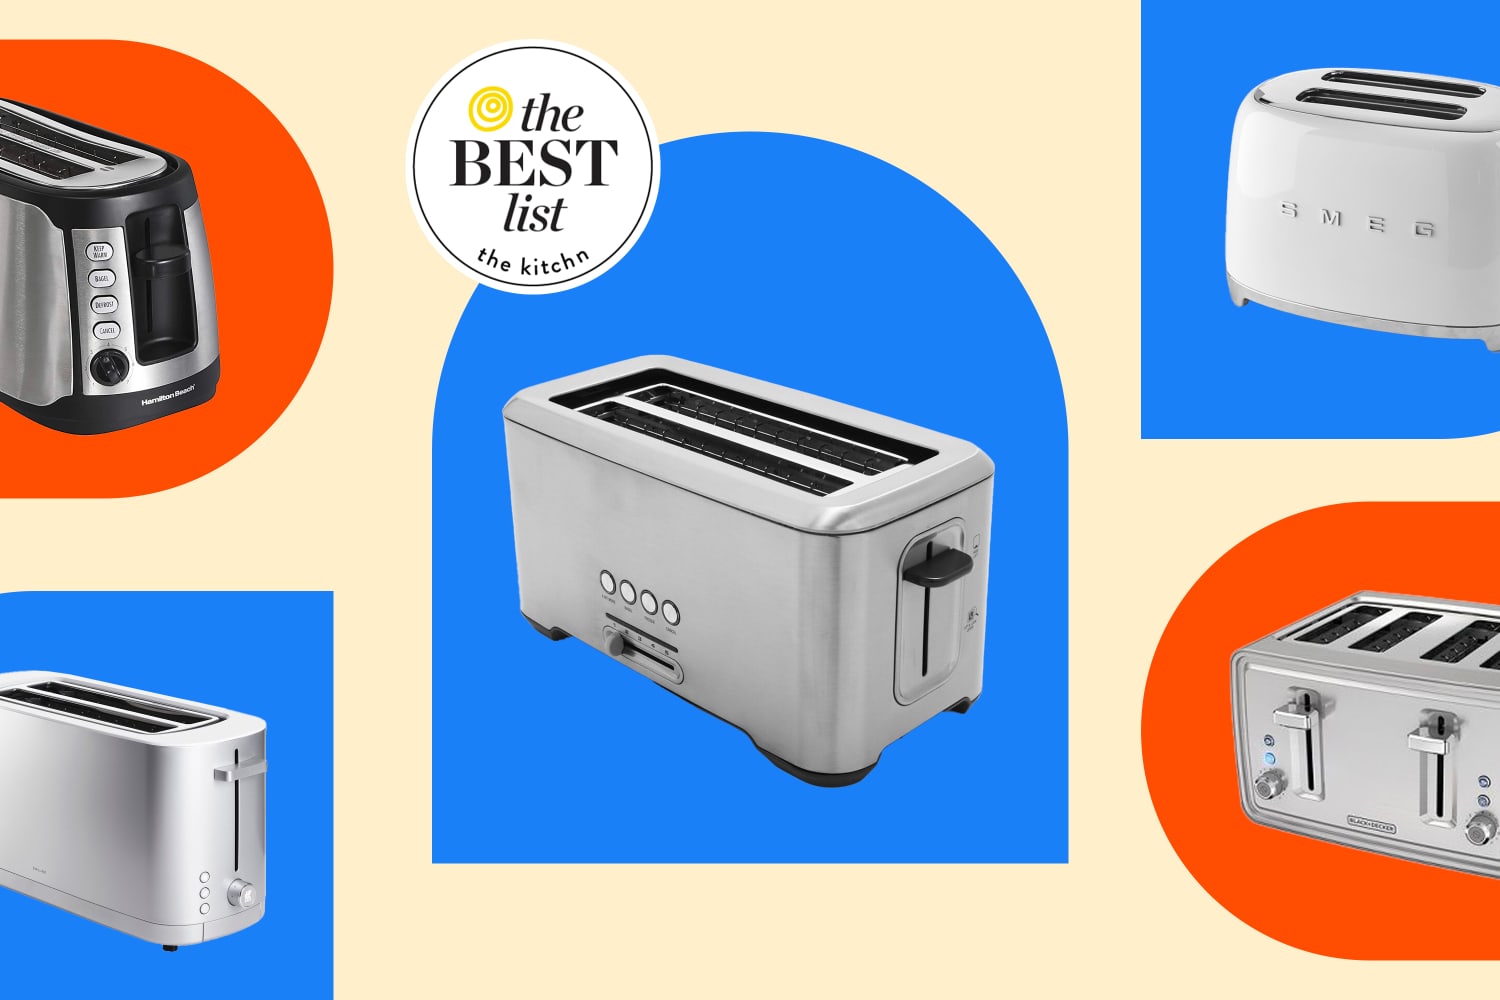 https://cdn.apartmenttherapy.info/image/upload/f_auto,q_auto:eco,c_fill,g_auto,w_1500,ar_3:2/commerce%2Fbest-list%2Fbest-list-toasters-lead